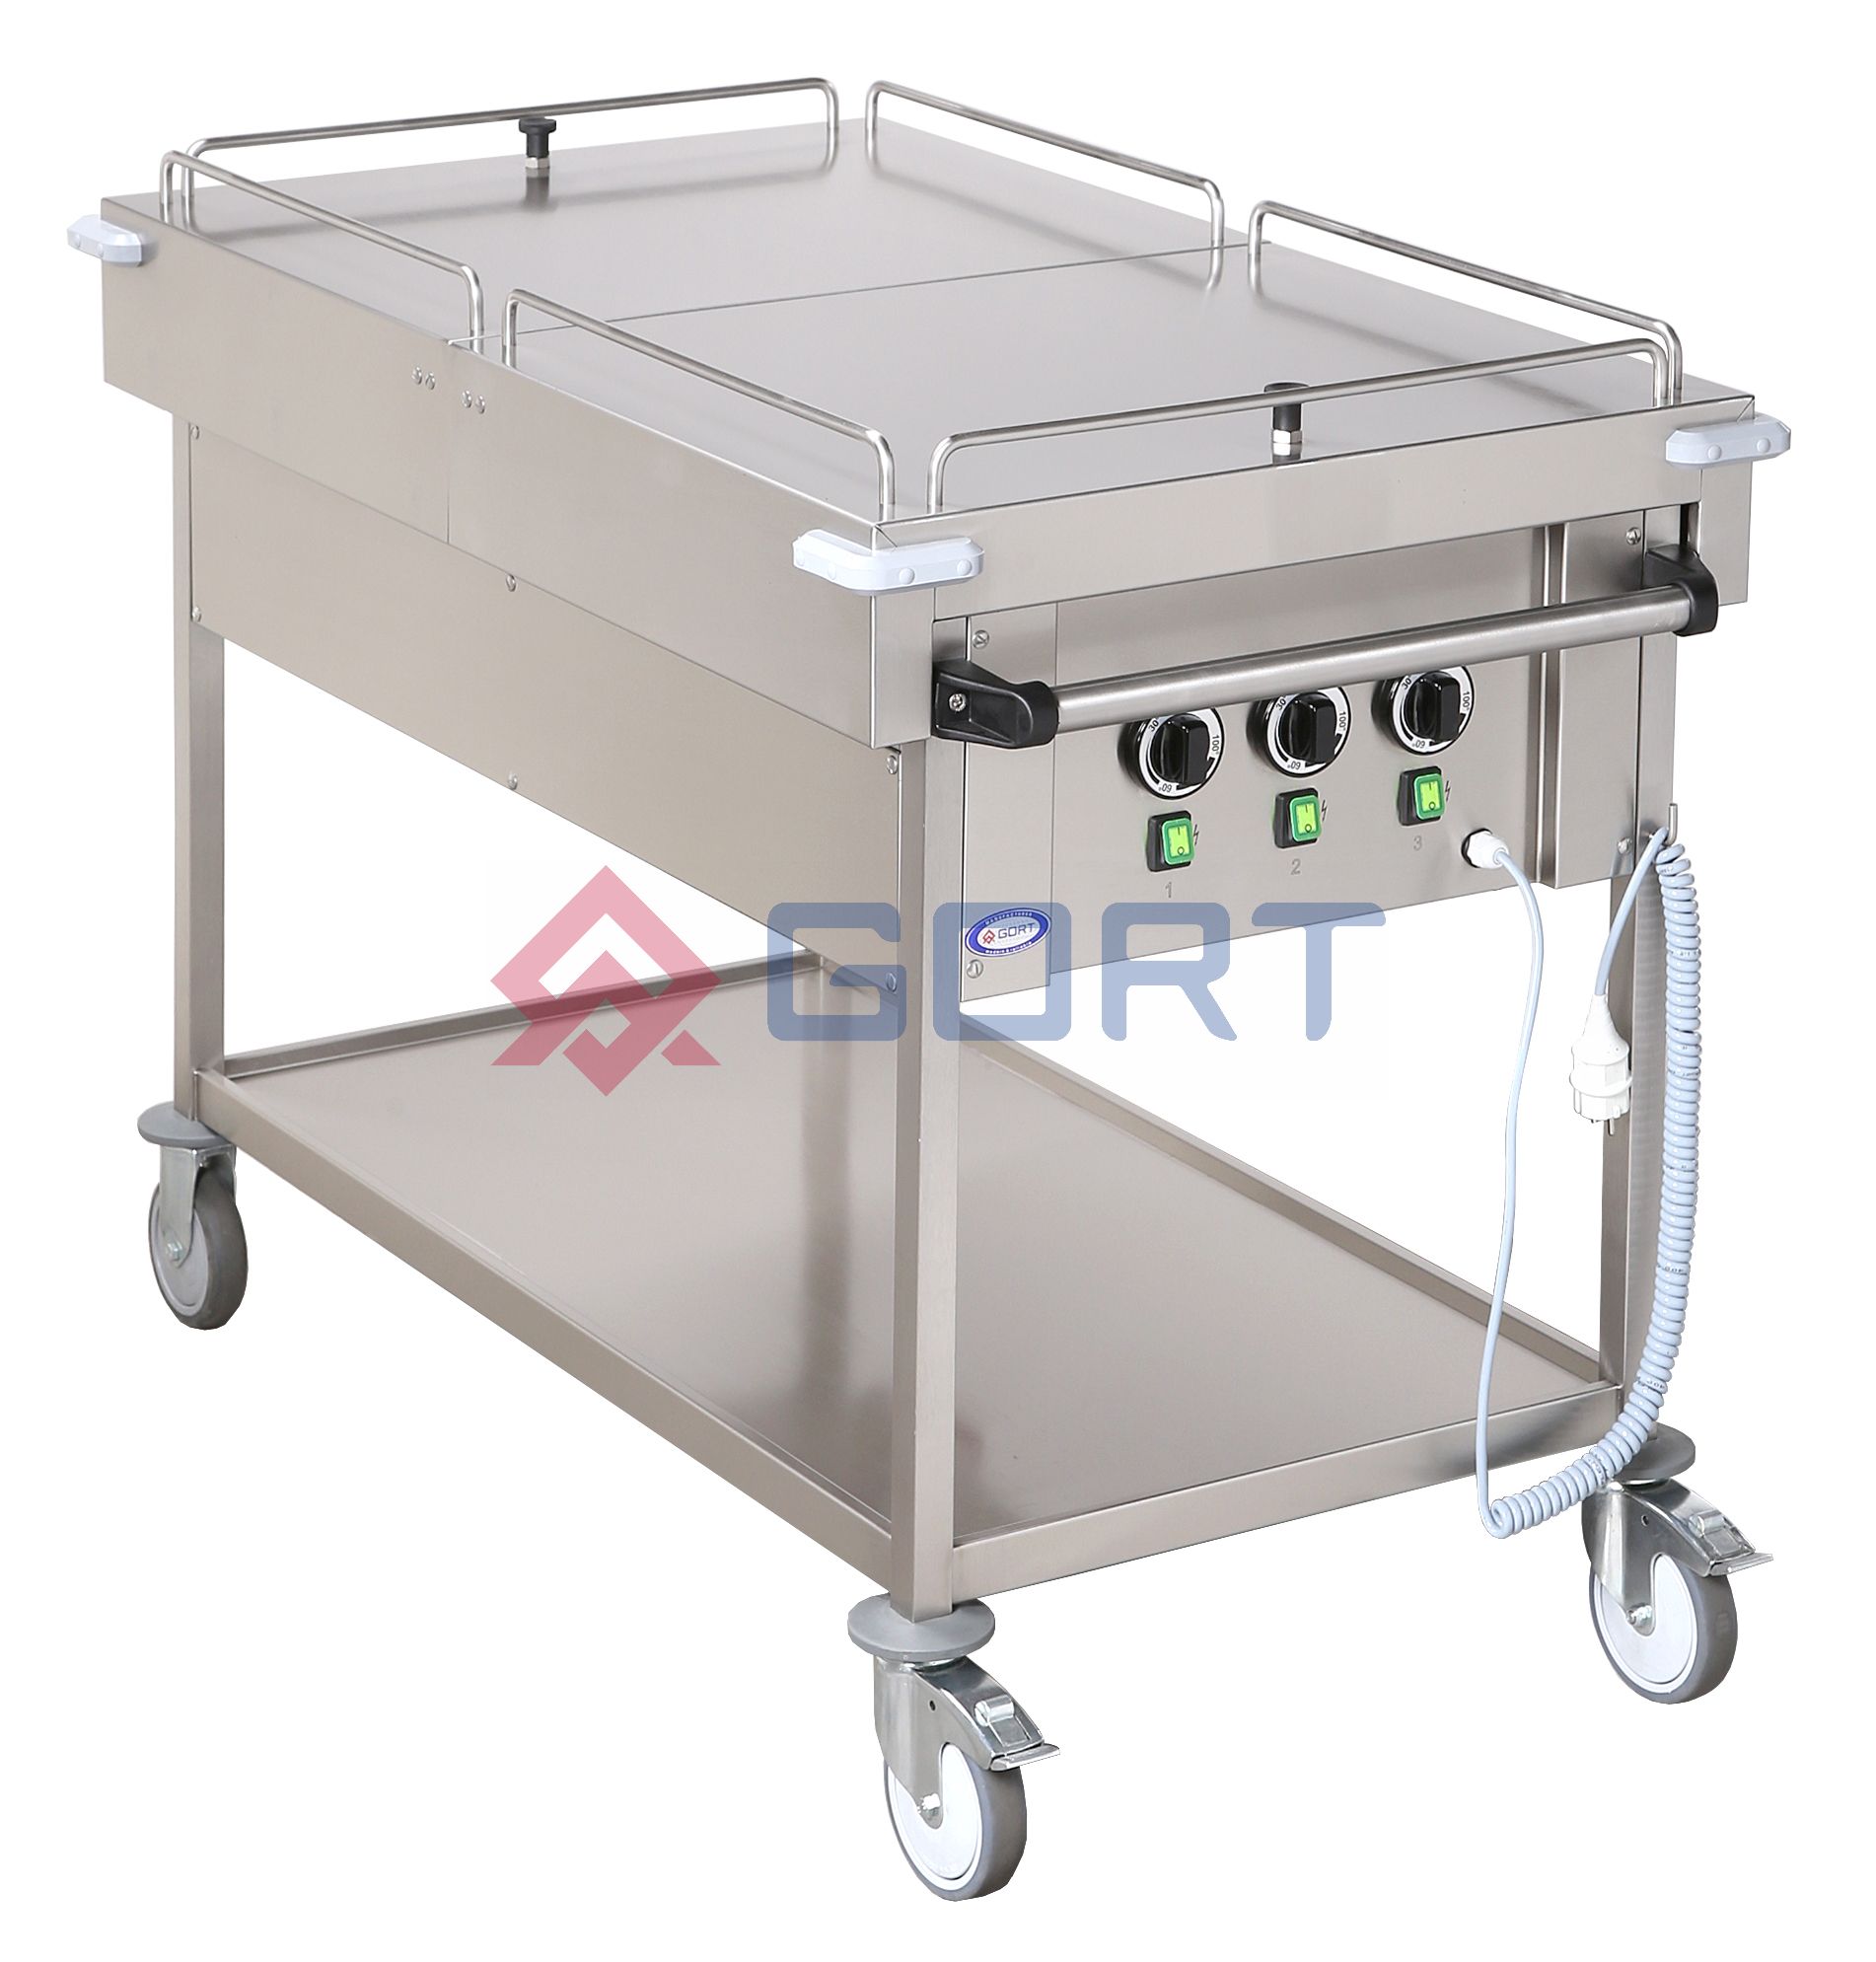 Bain marie trolley 3 wells, framework type with sliding top plate